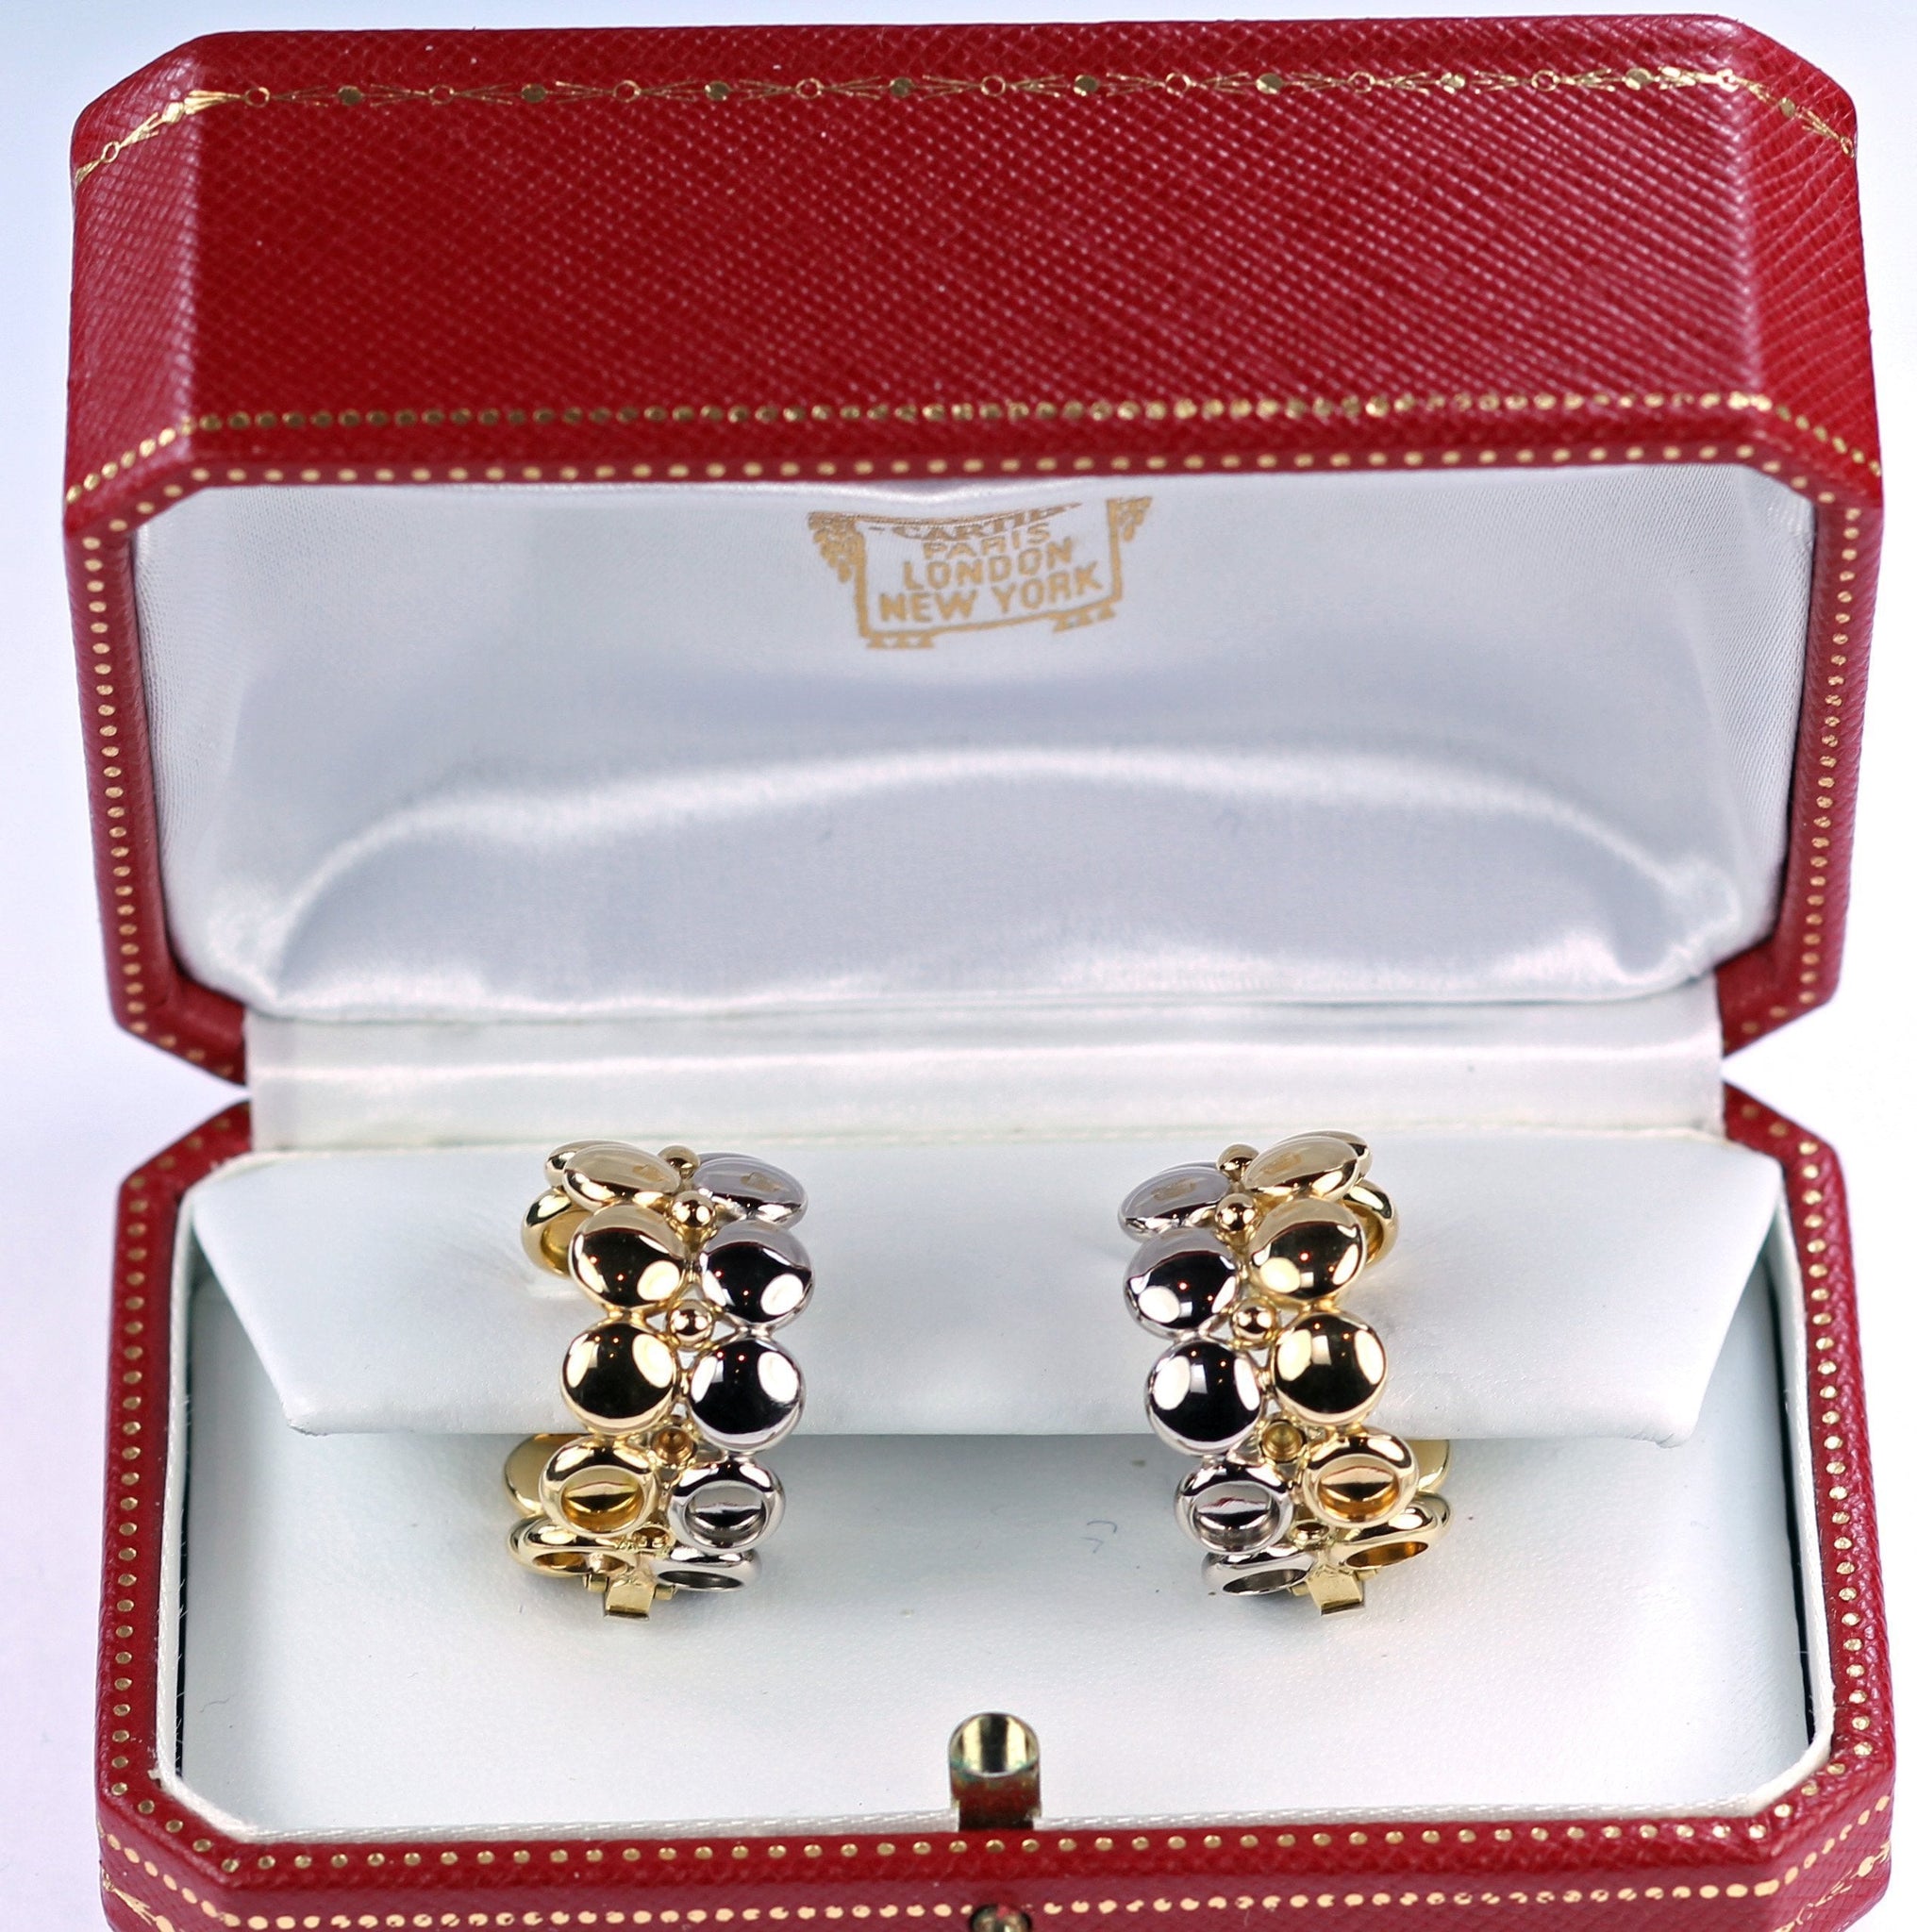 ##33 Pre-Owned Cartier Honeymoon Collection Earrings, SUPER SALE (Copy)